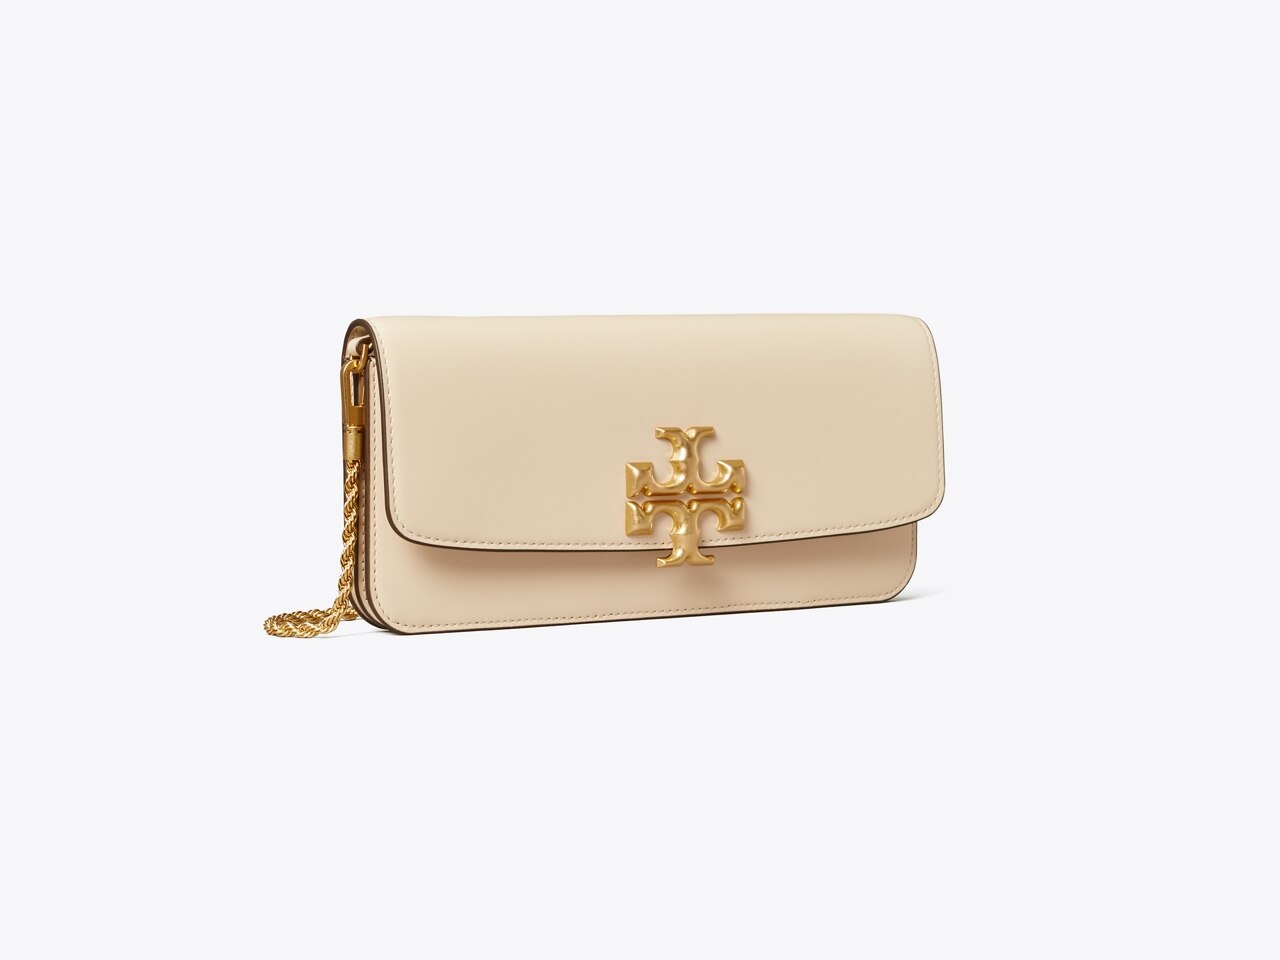 Shop Tory Burch Eleanor Croc-Embossed Leather Convertible Shoulder